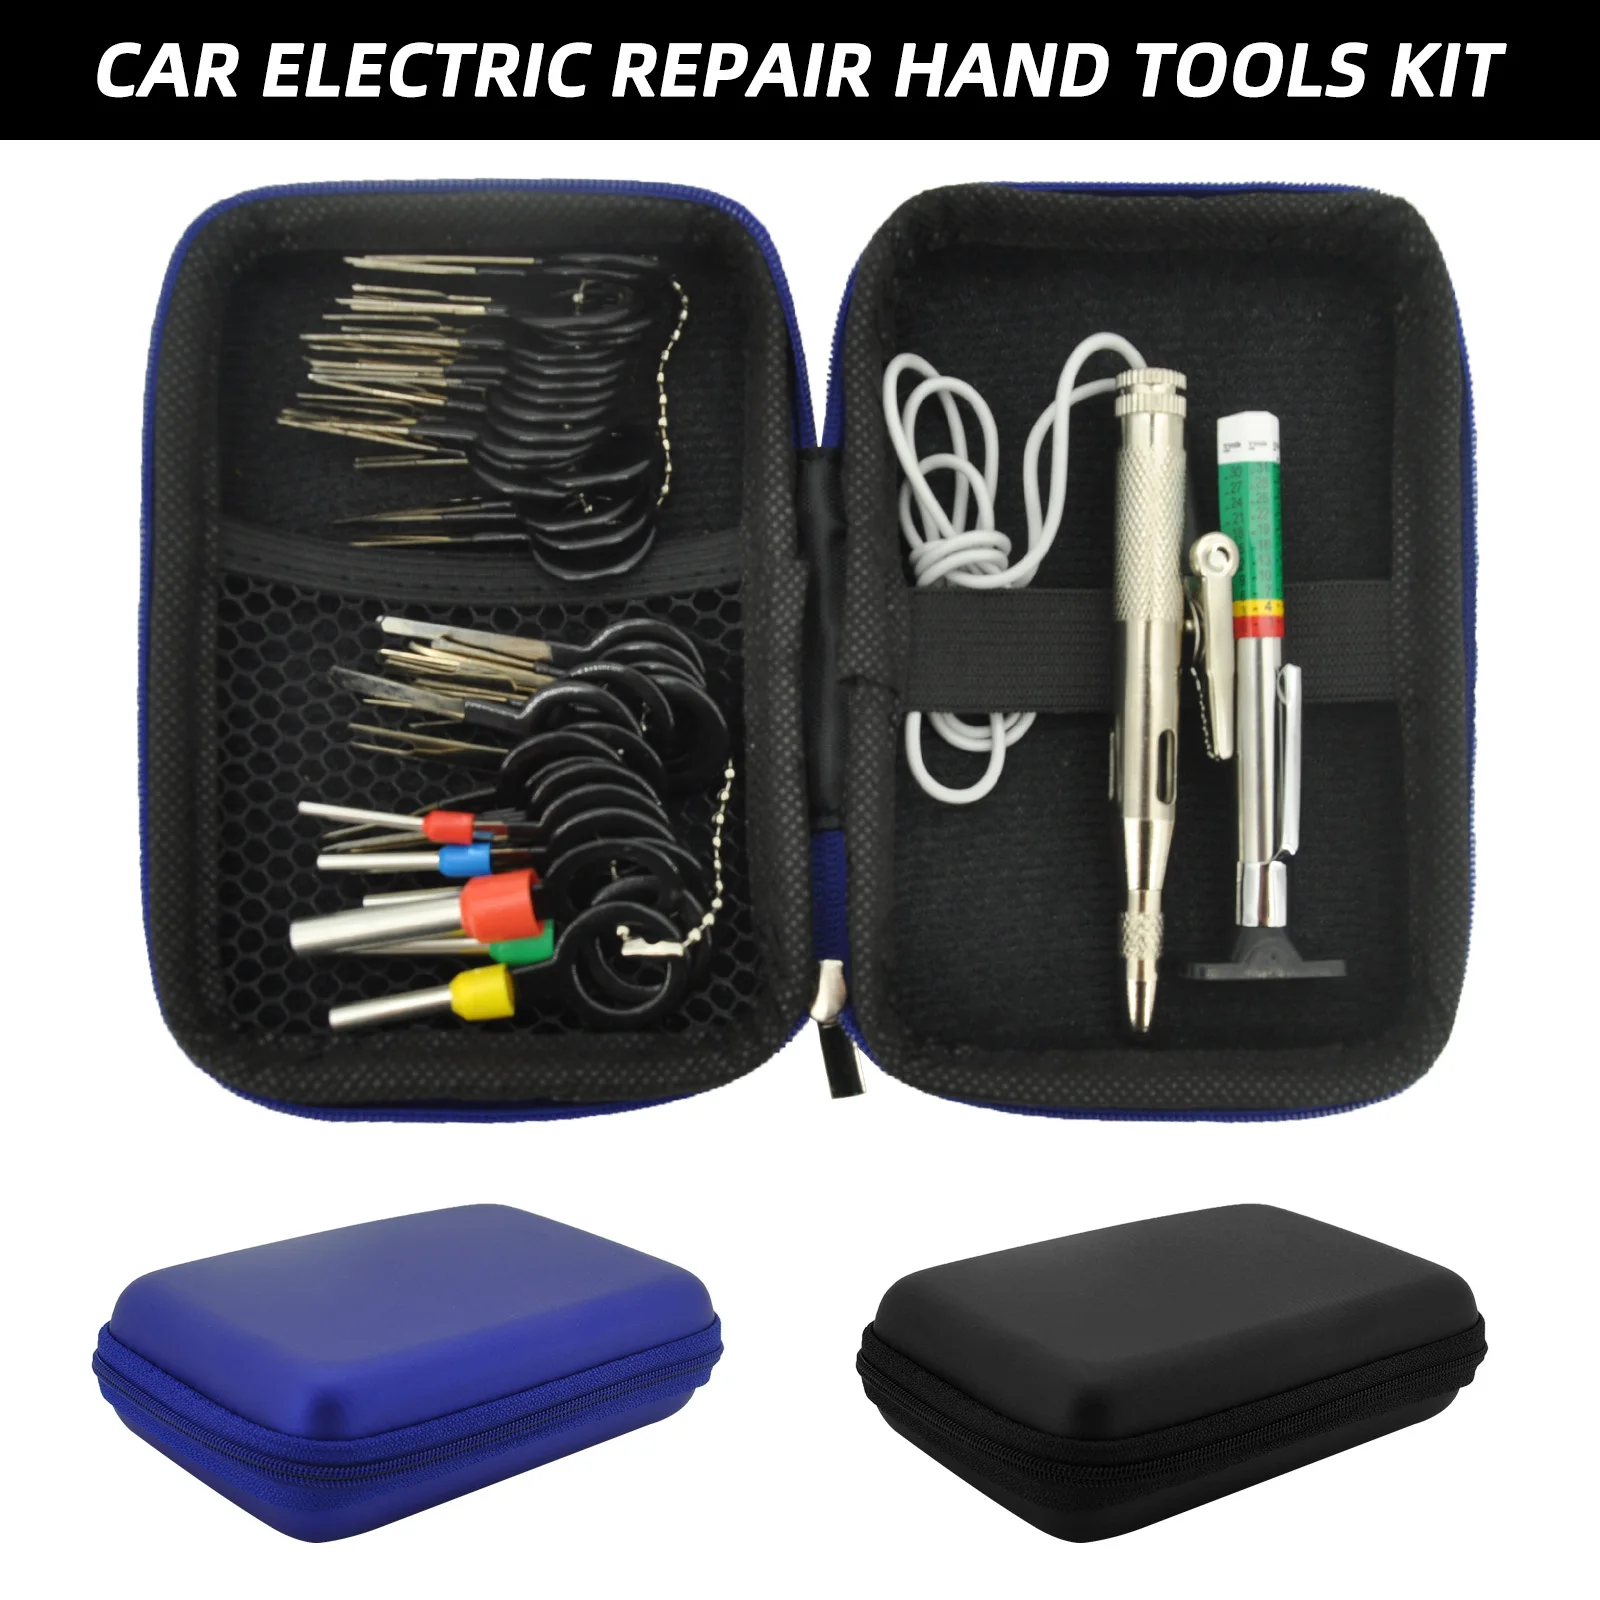 

41pcs Car Terminal Removal Electrical Wiring Crimp Connector Pin Extractor Kit Car Electric Repair Hand Tools Kit